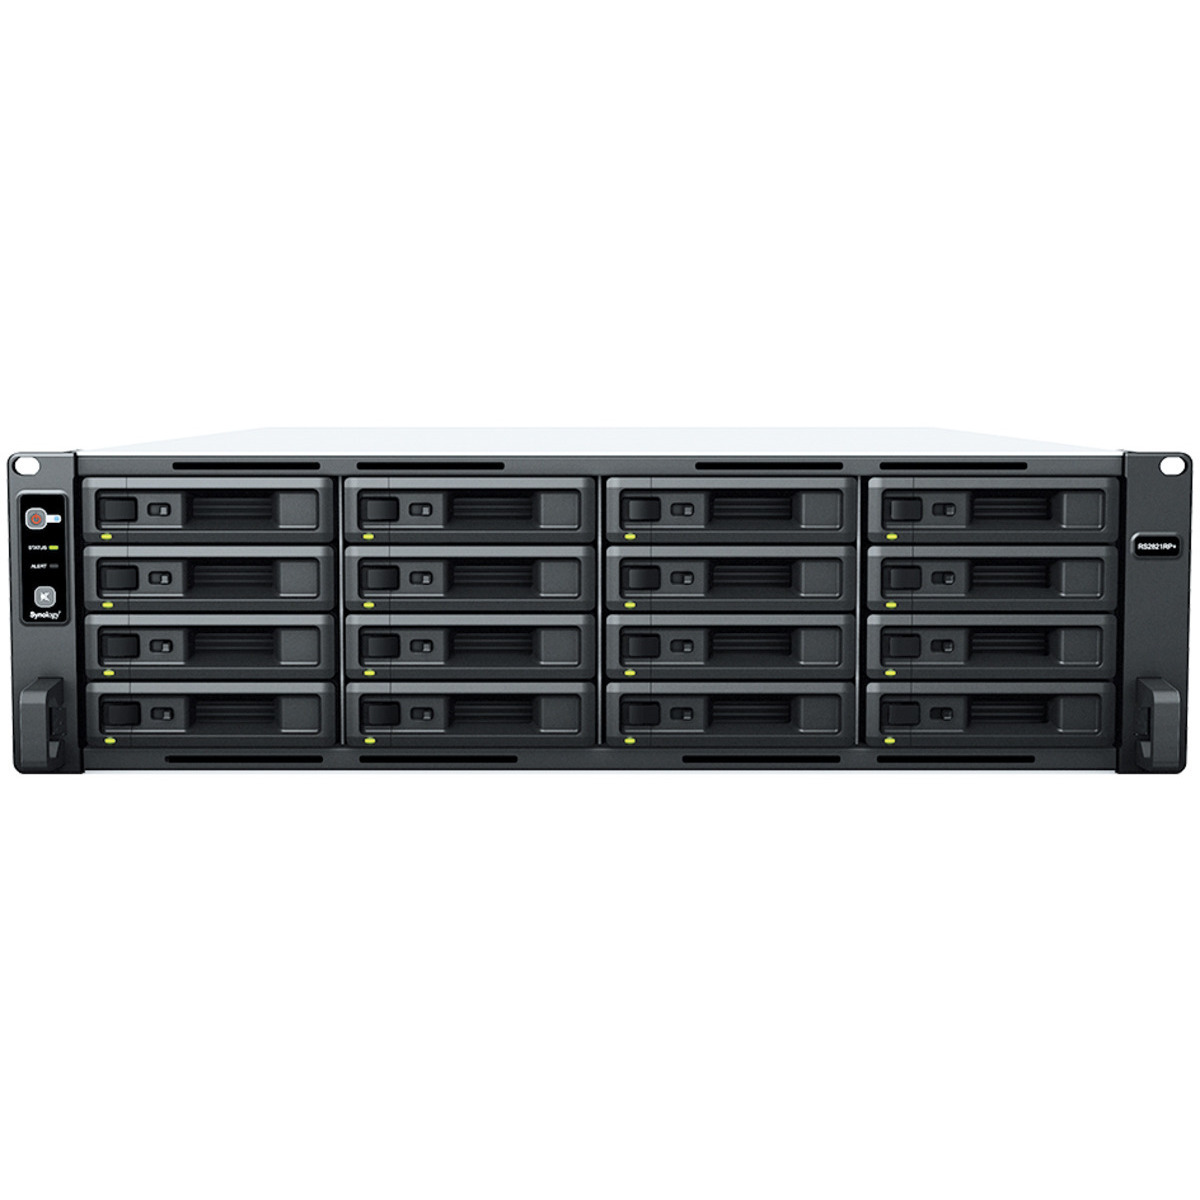 buy $11756 Synology RackStation RS2821RP+ 192tb RackMount NAS - Network Attached Storage Device 16x12000gb Seagate IronWolf Pro ST12000NE0008 3.5 7200rpm SATA 6Gb/s HDD NAS Class Drives Installed - Burn-In Tested - nas headquarters buy network attached storage server device das new raid-5 free shipping usa christmas new year holiday sale RackStation RS2821RP+